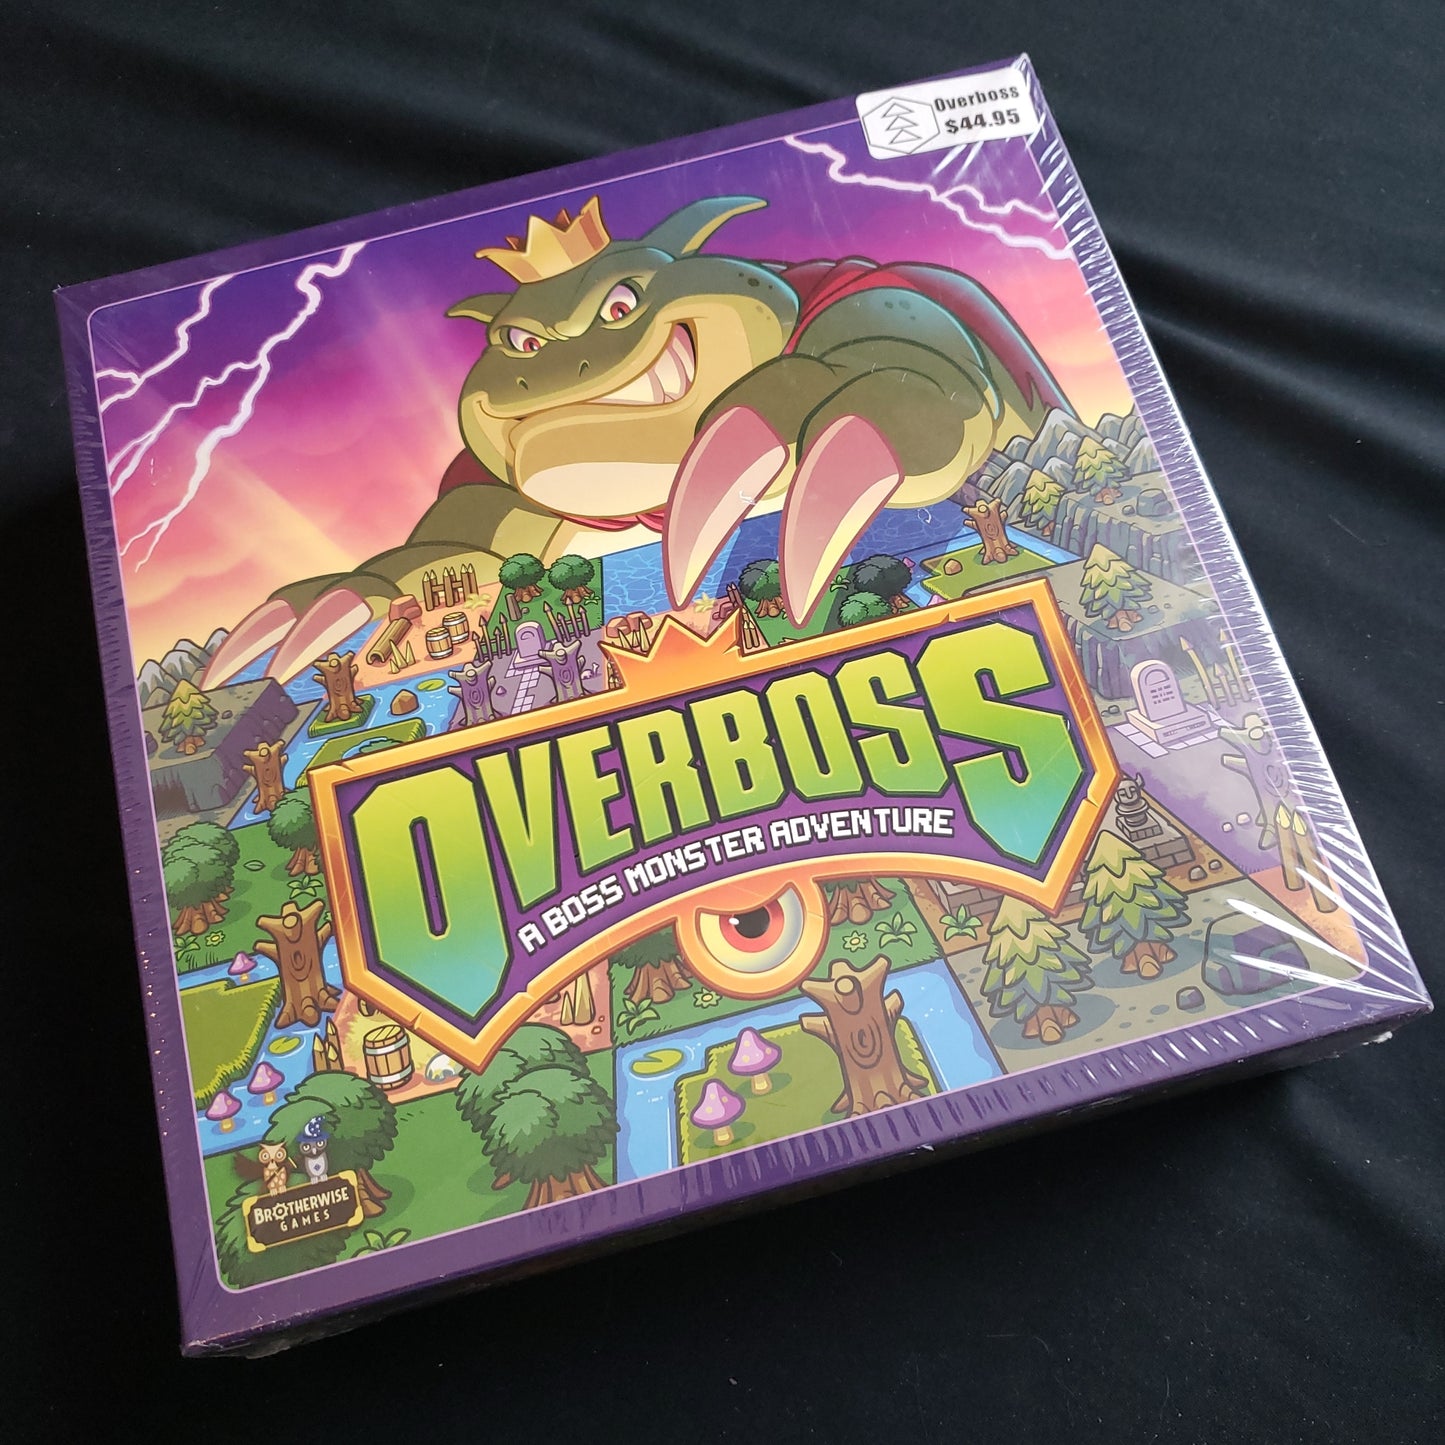 Image shows the front cover of the box of the Overboss board game